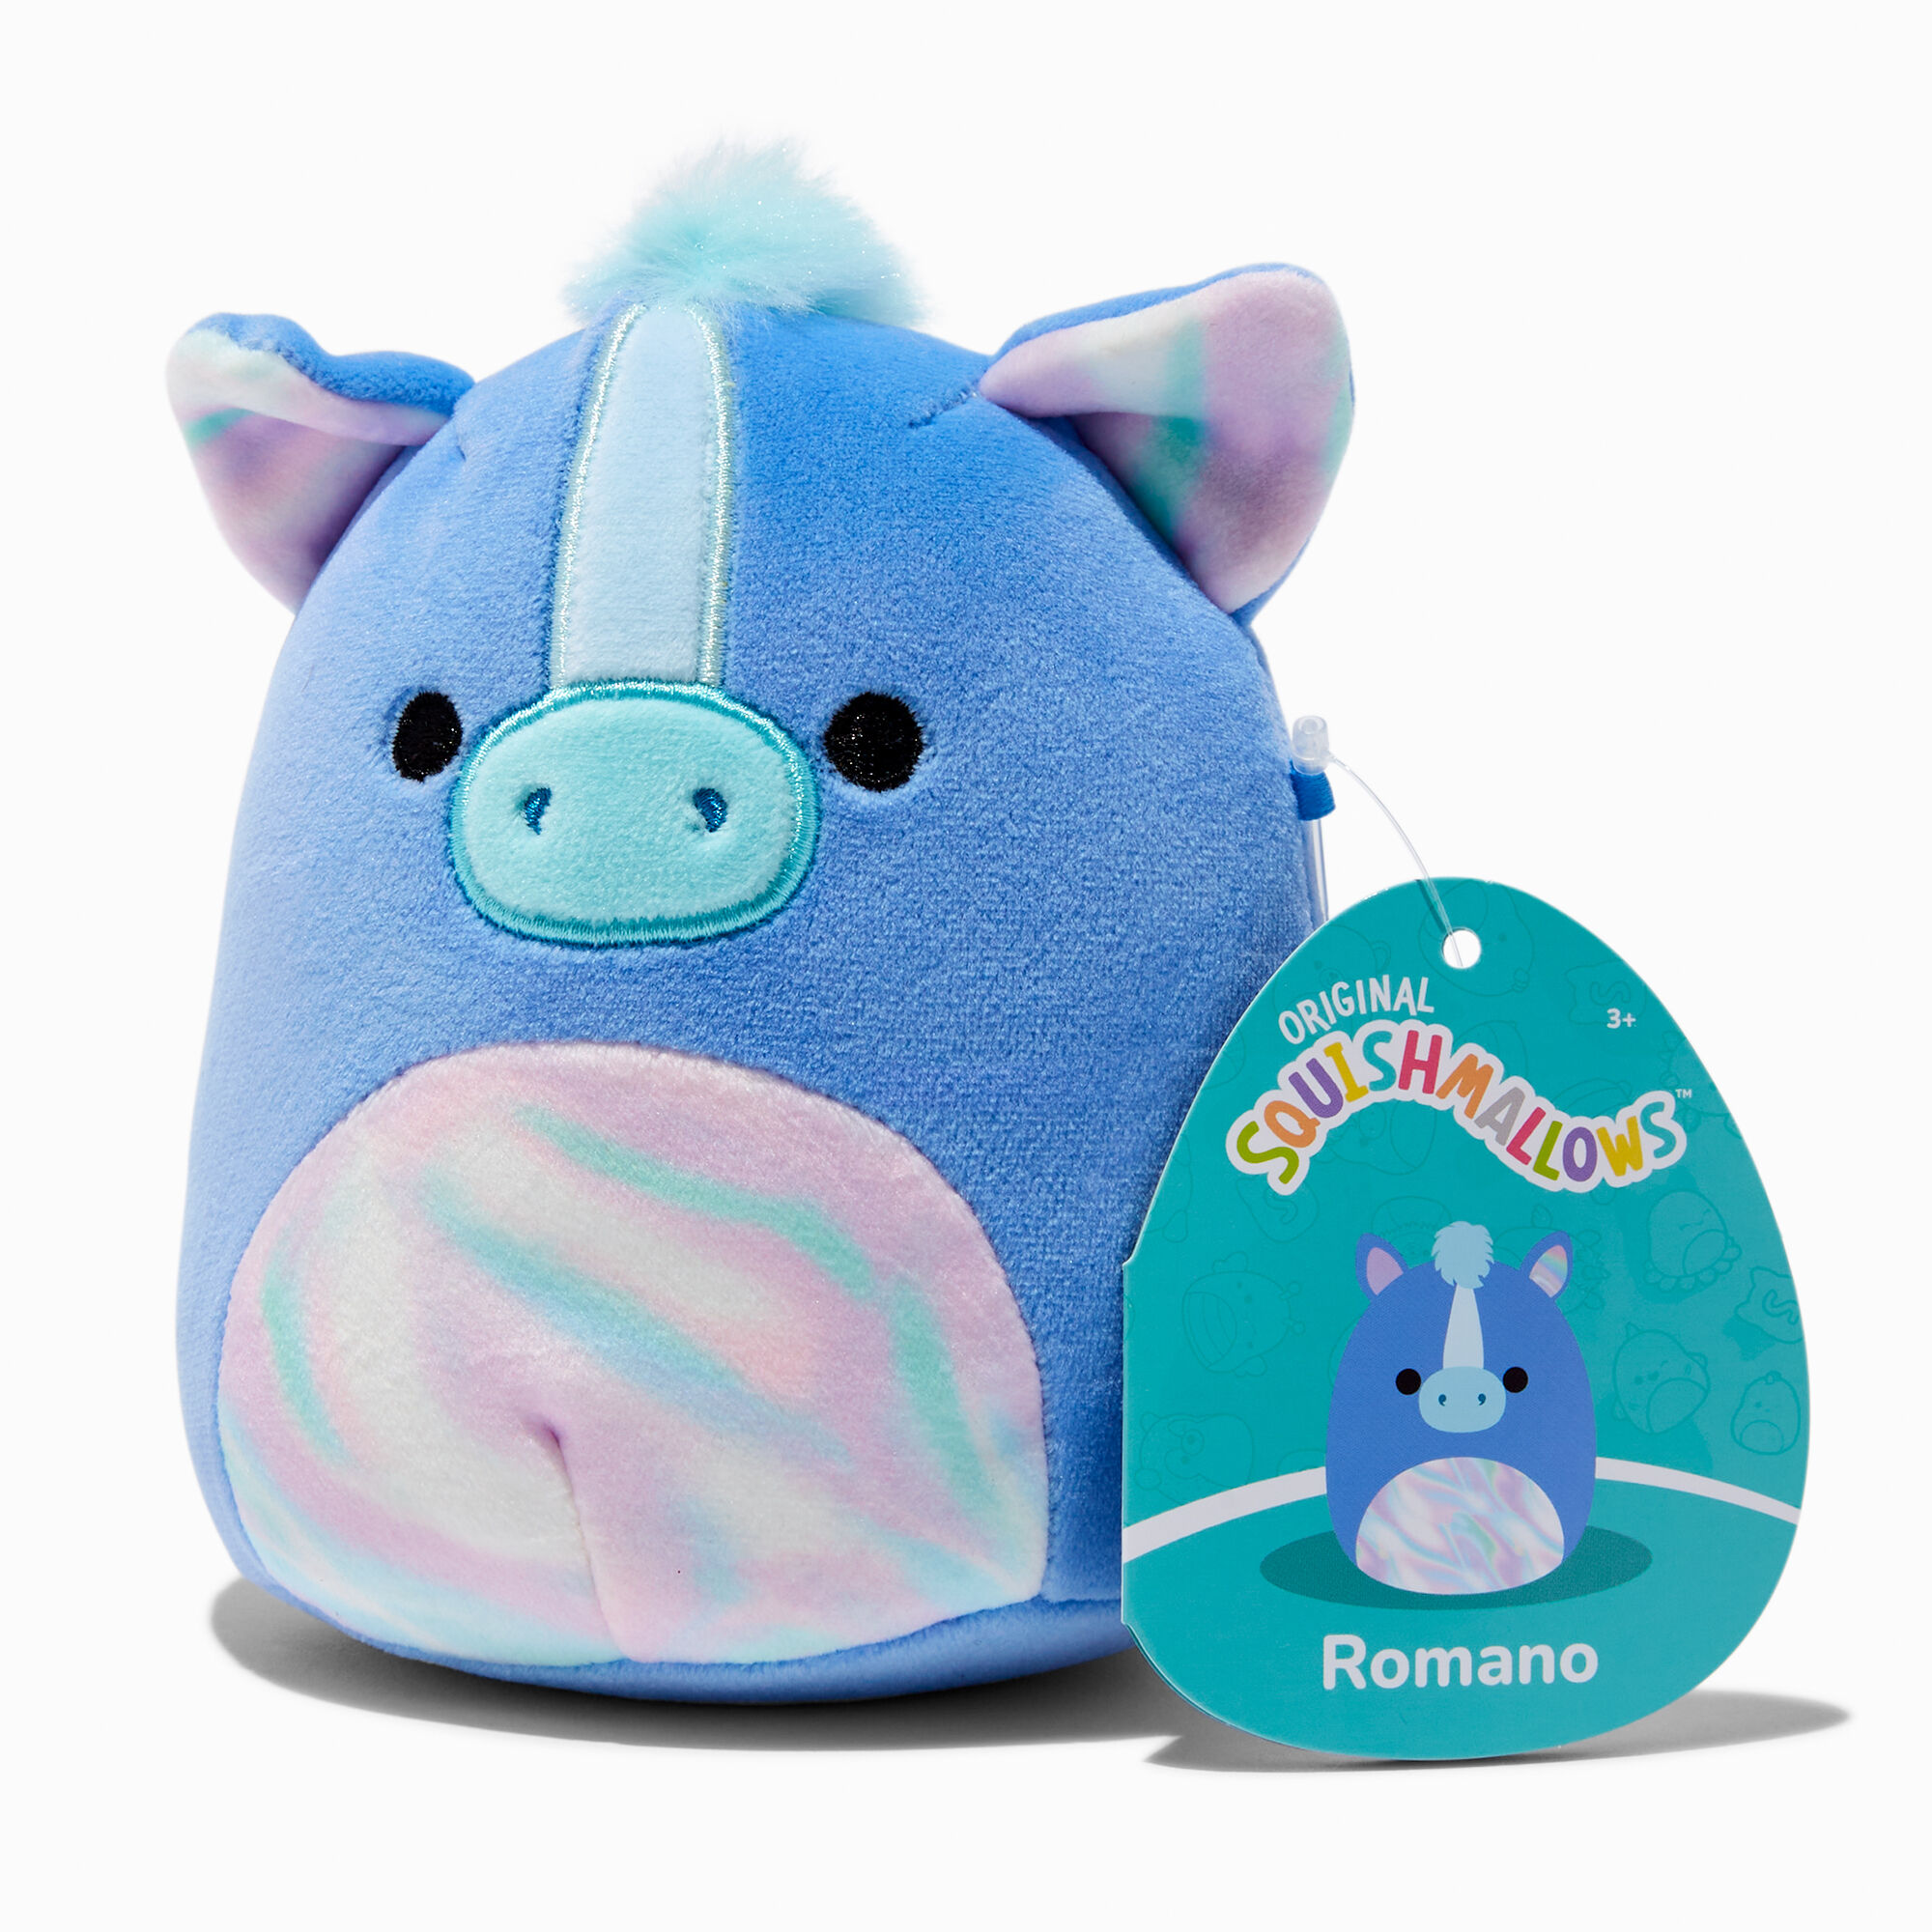 View Claires Squishmallows 5 Romano Soft Toy information